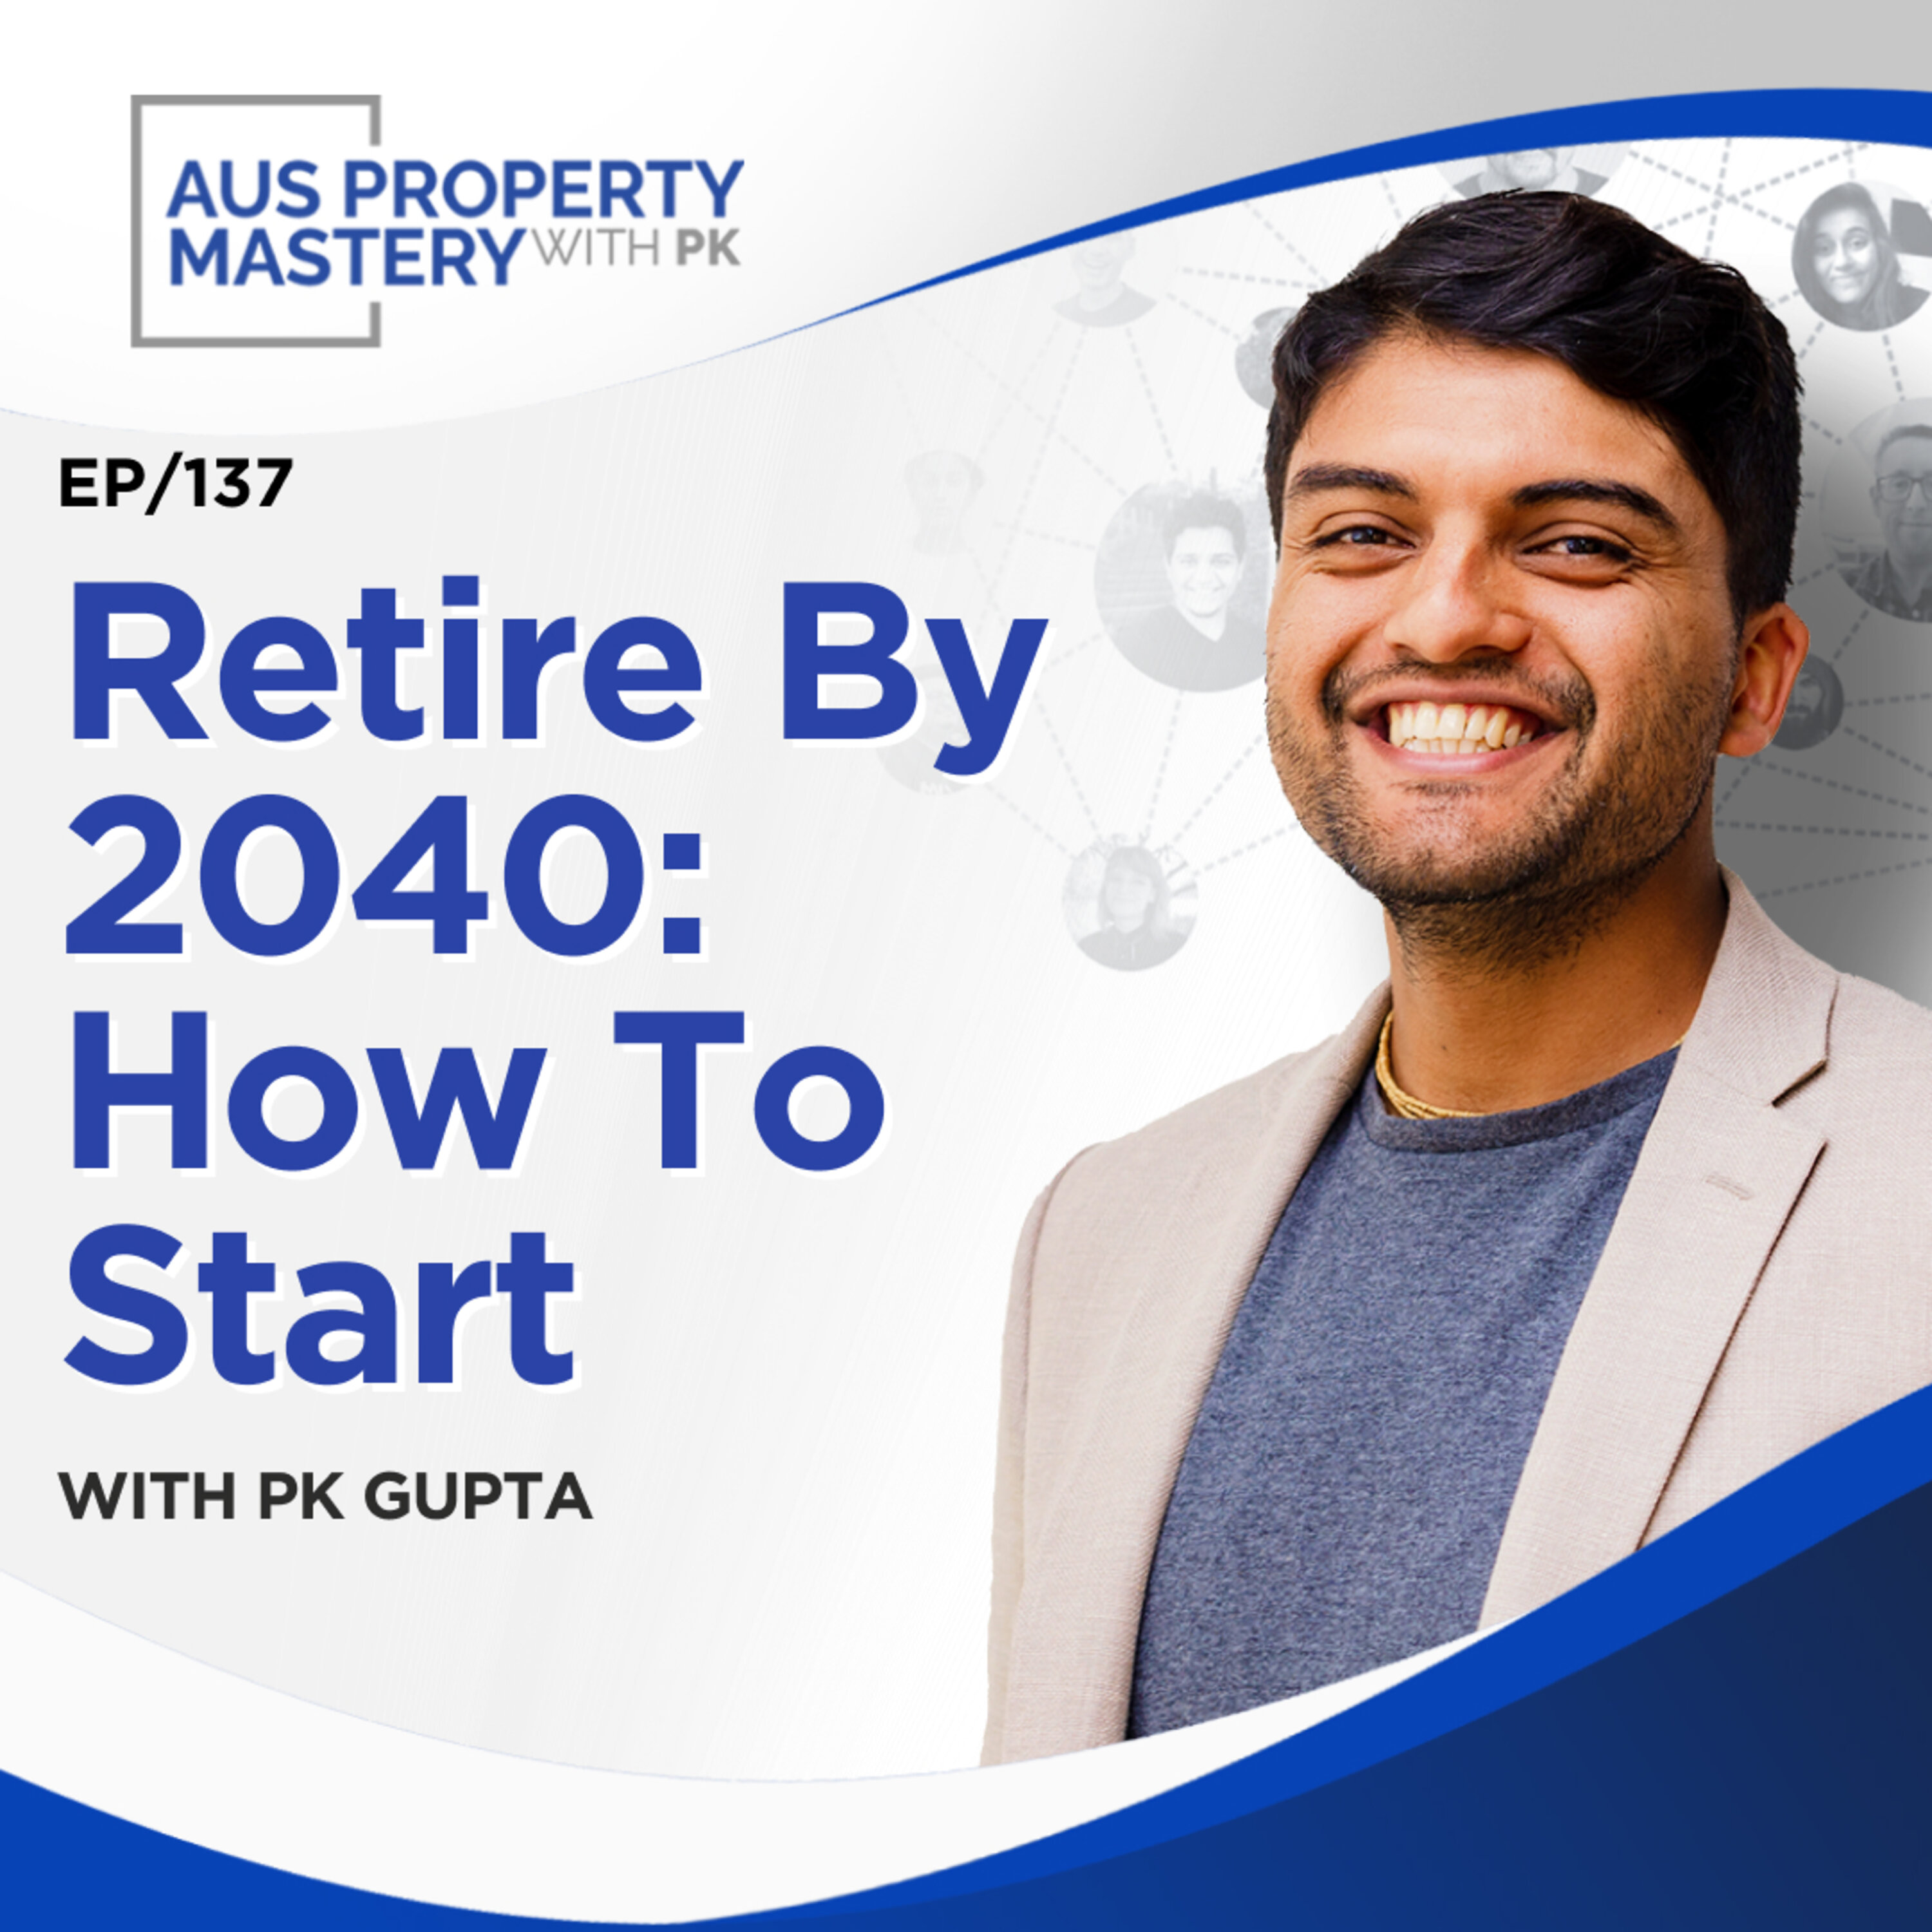 Retire By 2040: How To Start